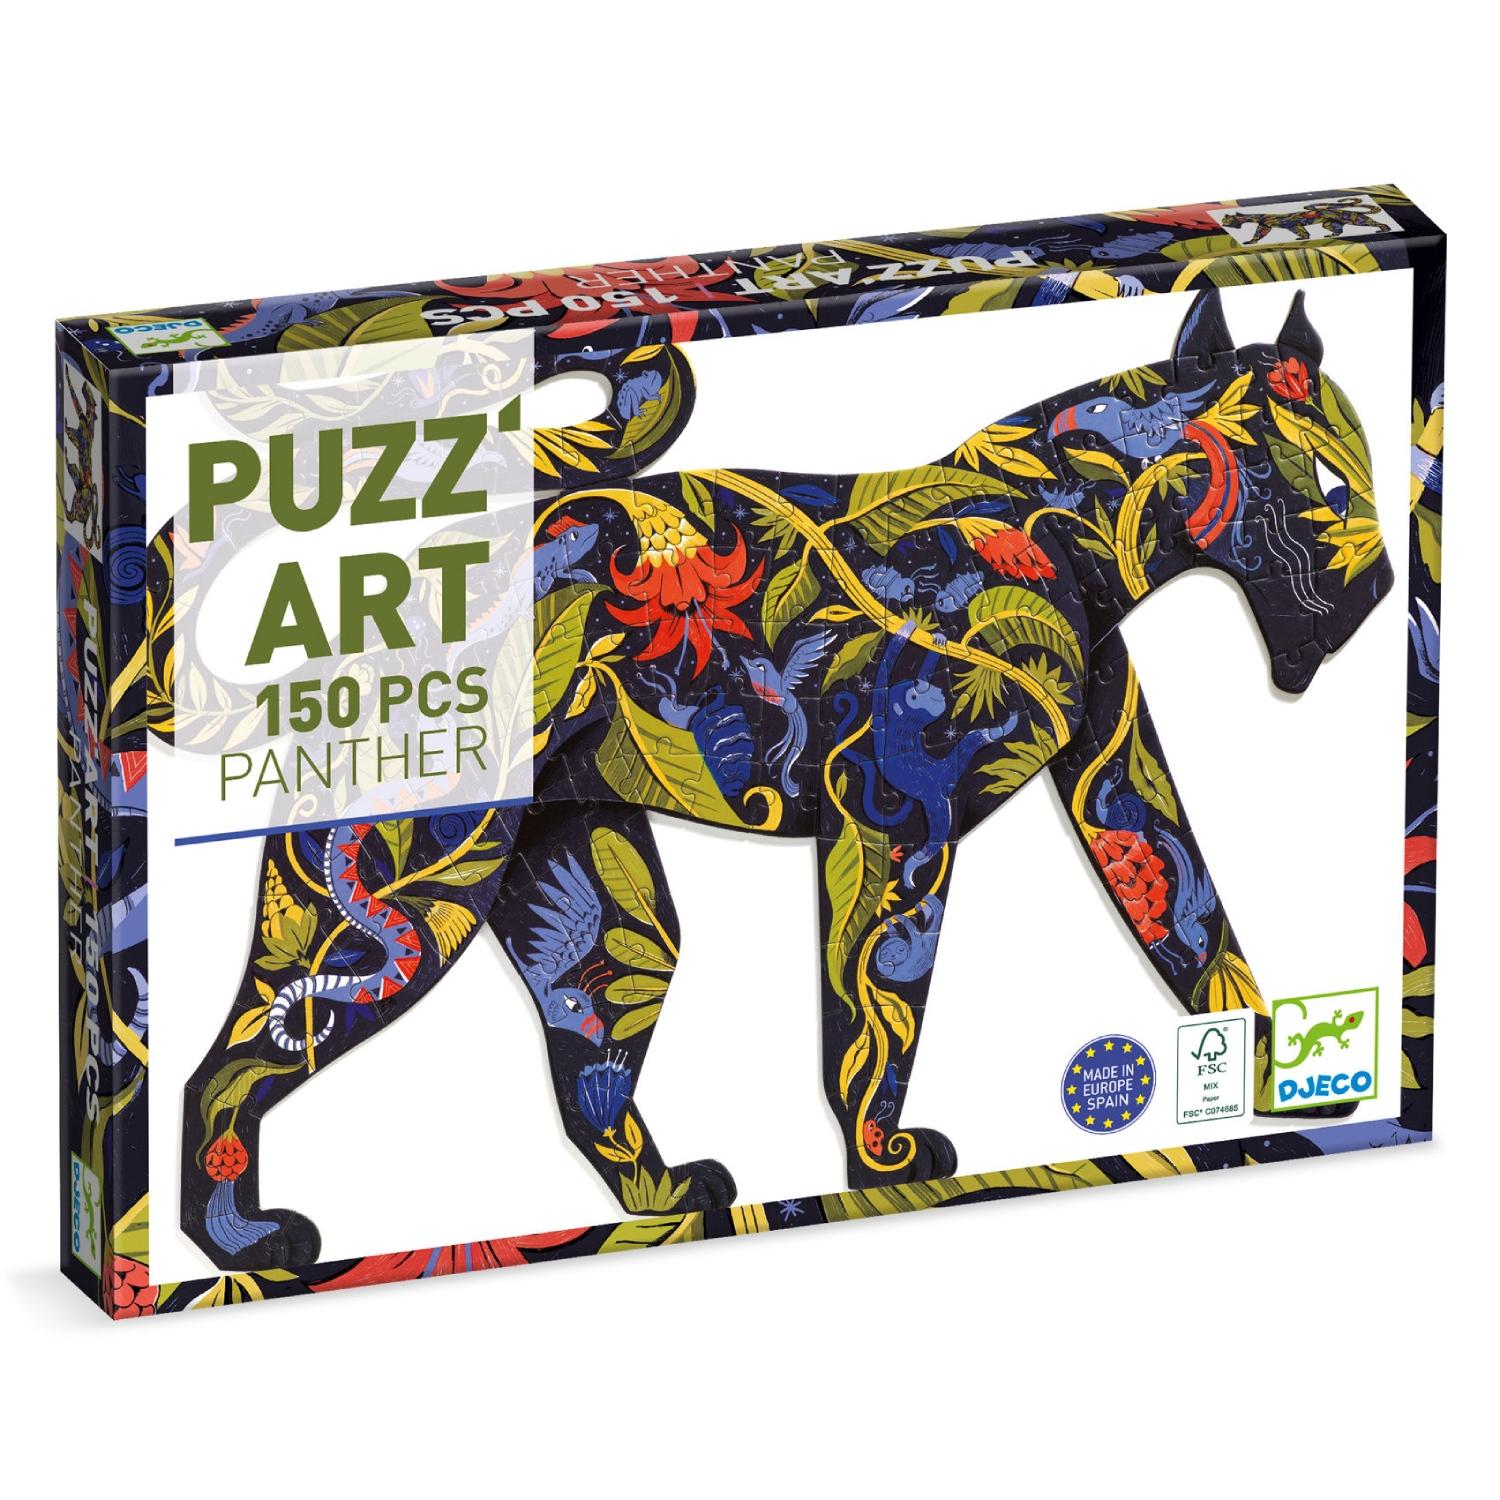 puzz'art panther 150 pieces by djeco